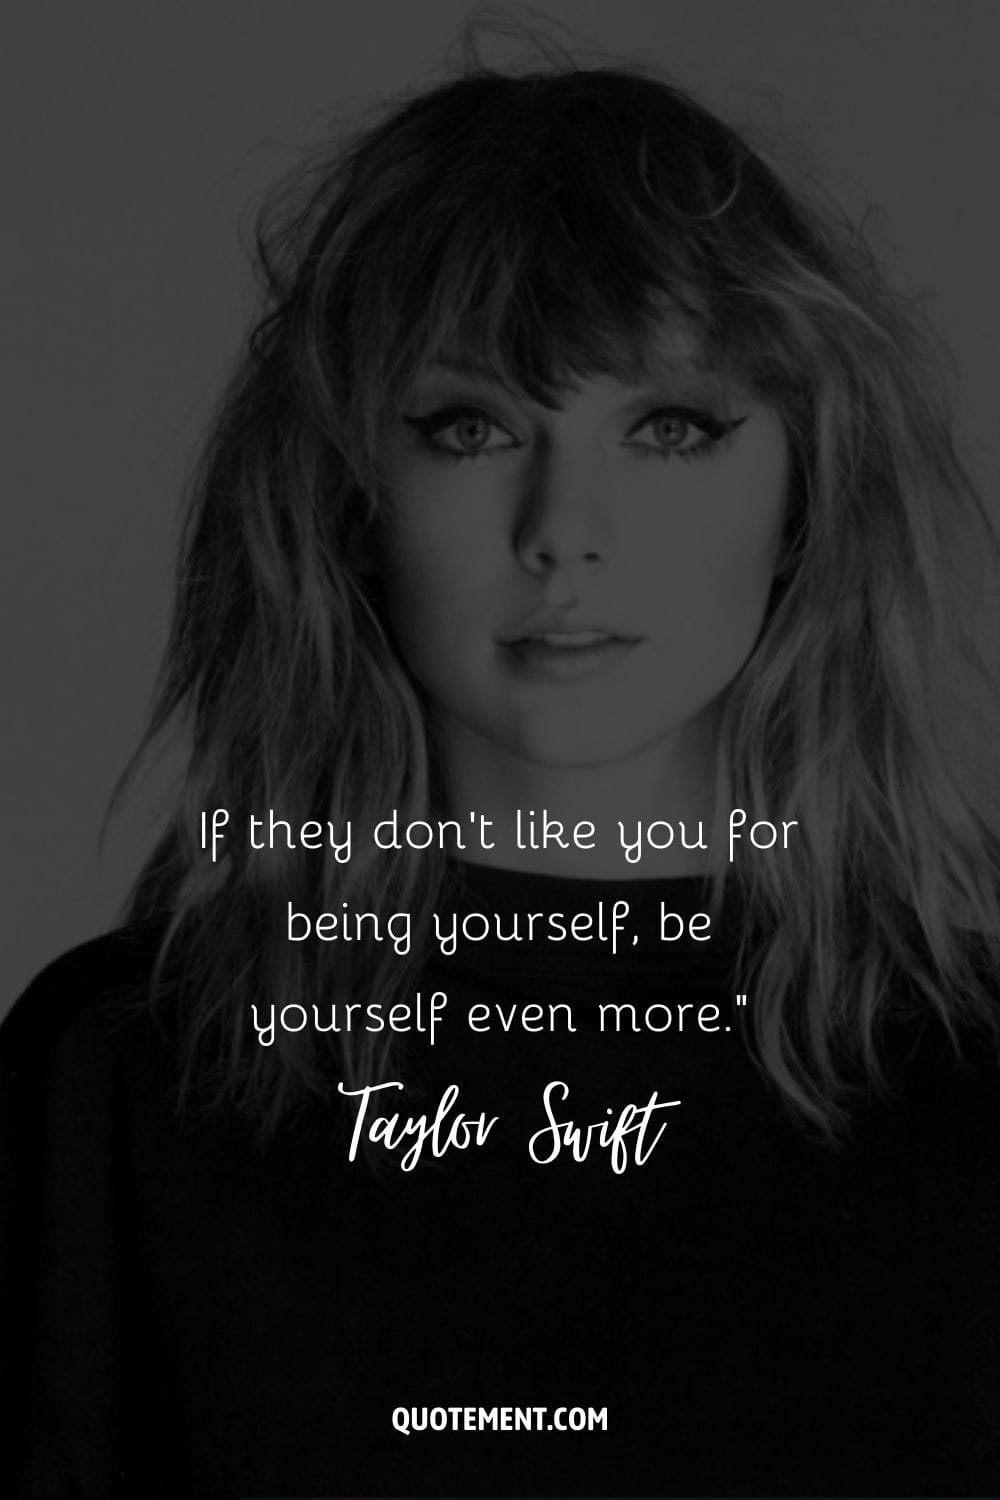 “If they don't like you for being yourself, be yourself even more.” ― Taylor Swift